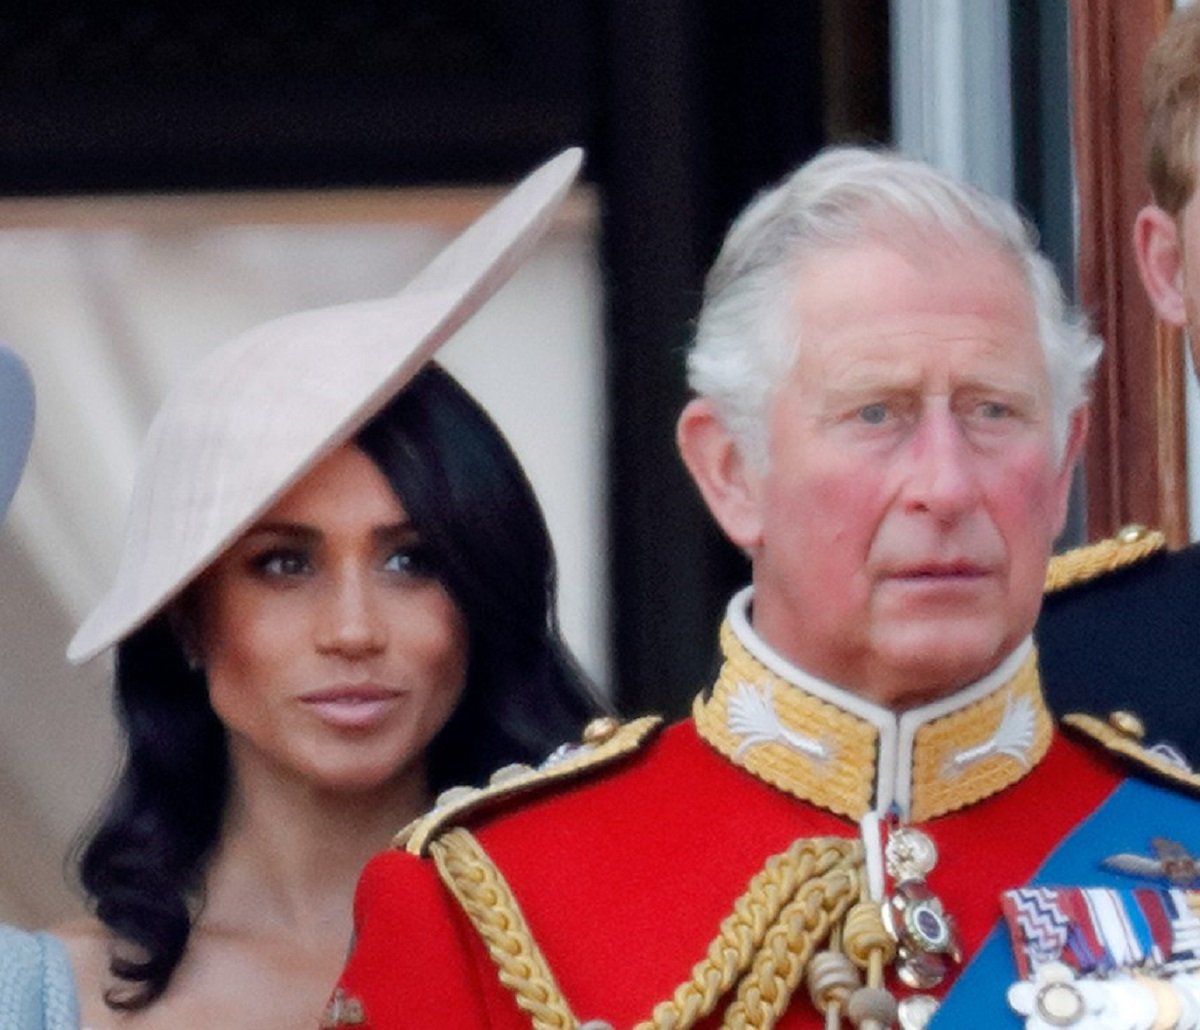 Meghan Markle and now-King Charles III, who both 'absolutely hated' one royal rule, standing on the balcony of Buckingham Palace during Trooping The Colour 2018